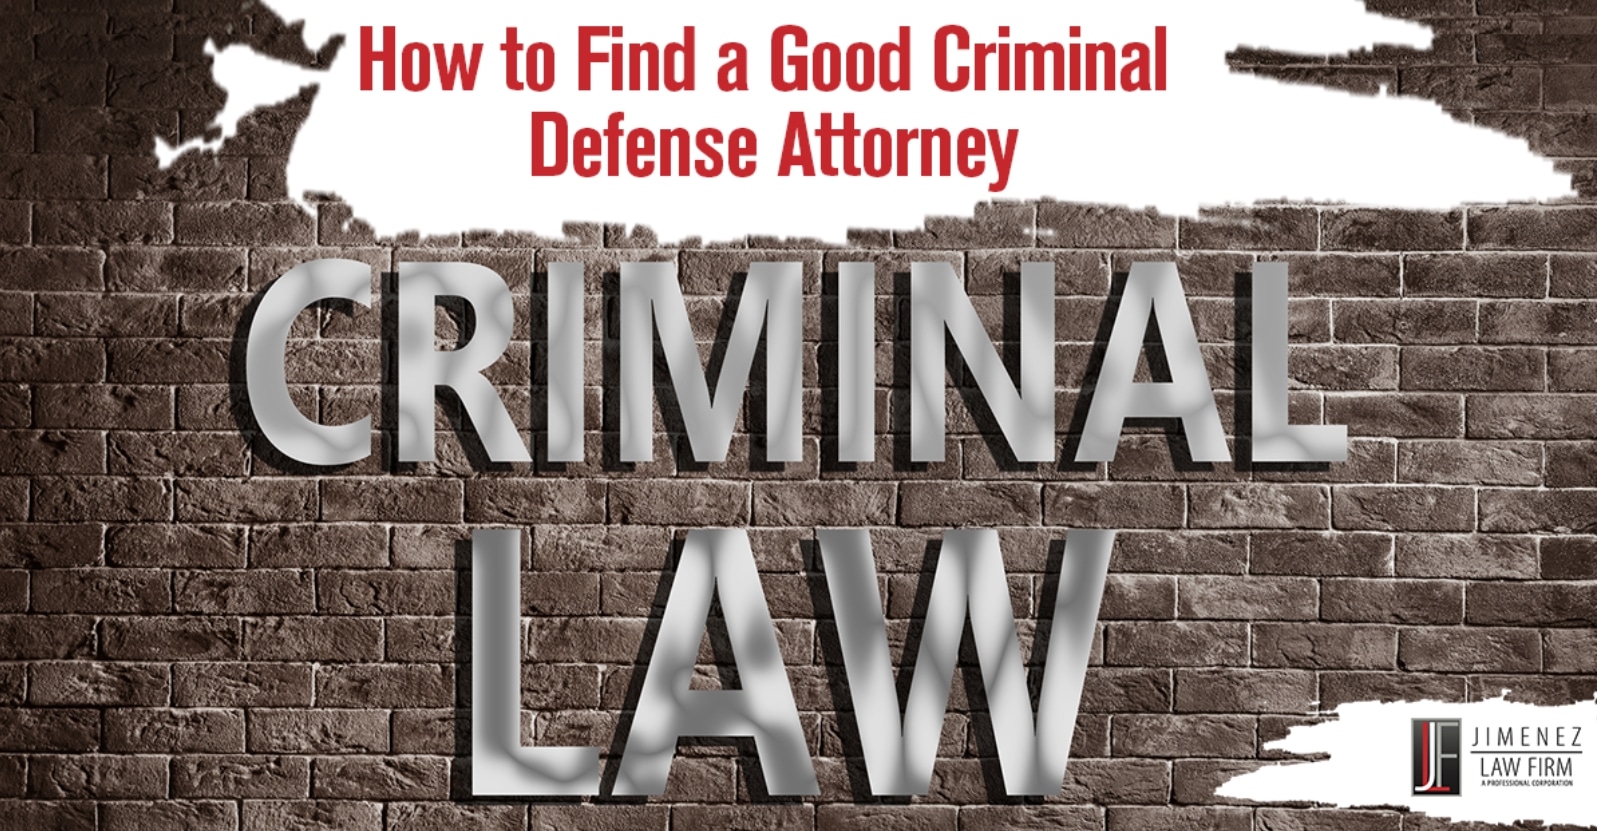 How to Find a Good Criminal Defense Attorney